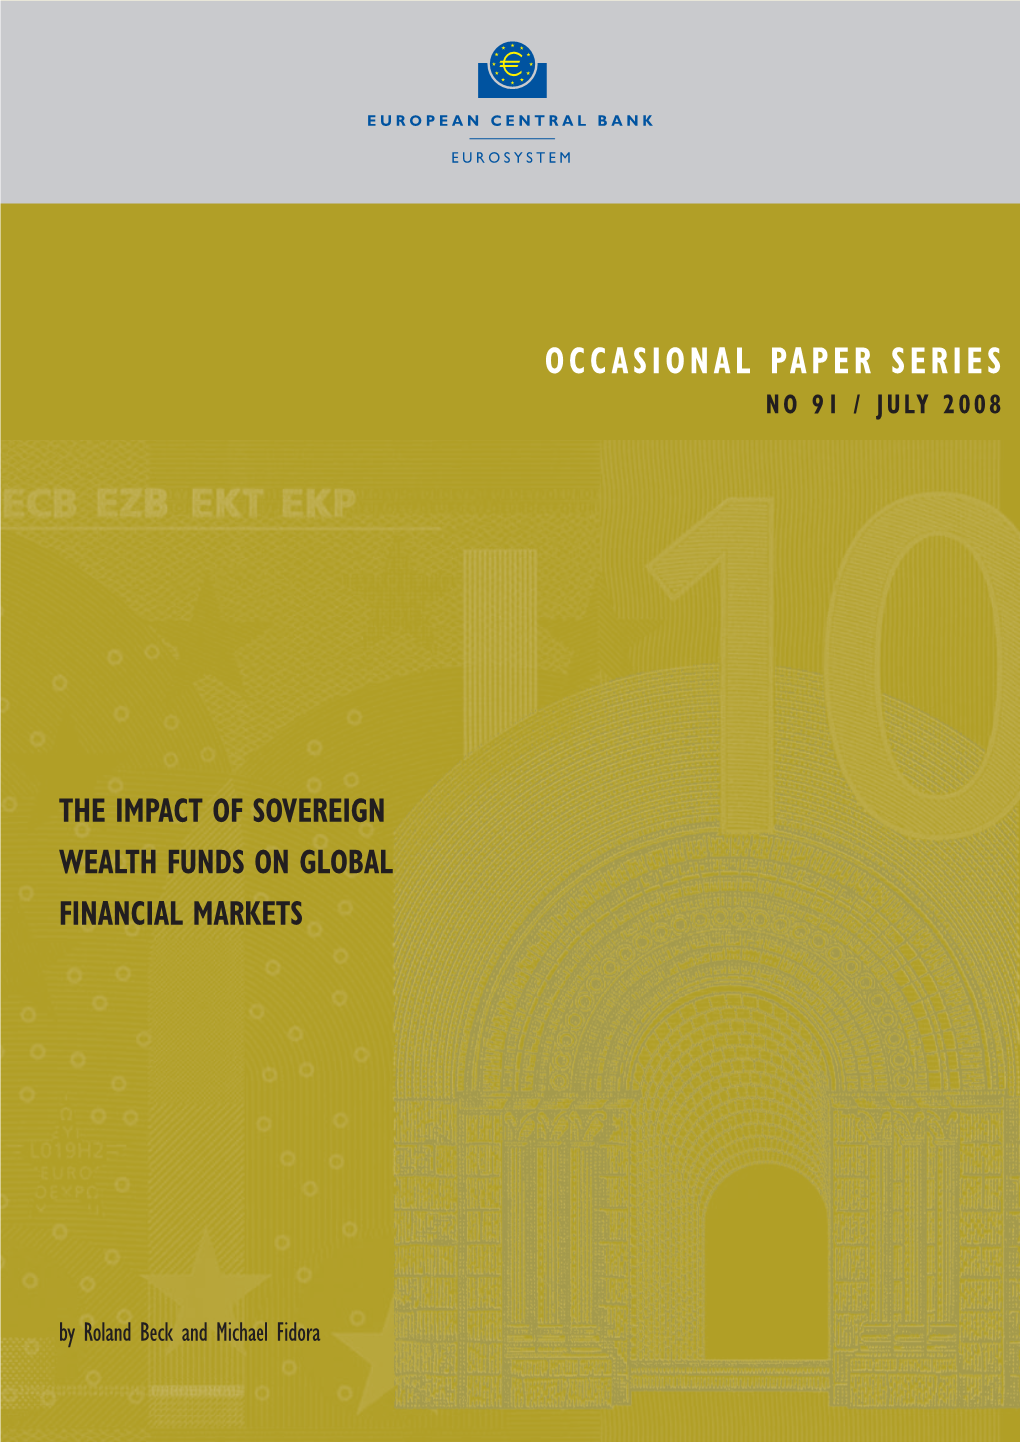 The Impact of Sovereign Wealth Funds on Global Financial Markets